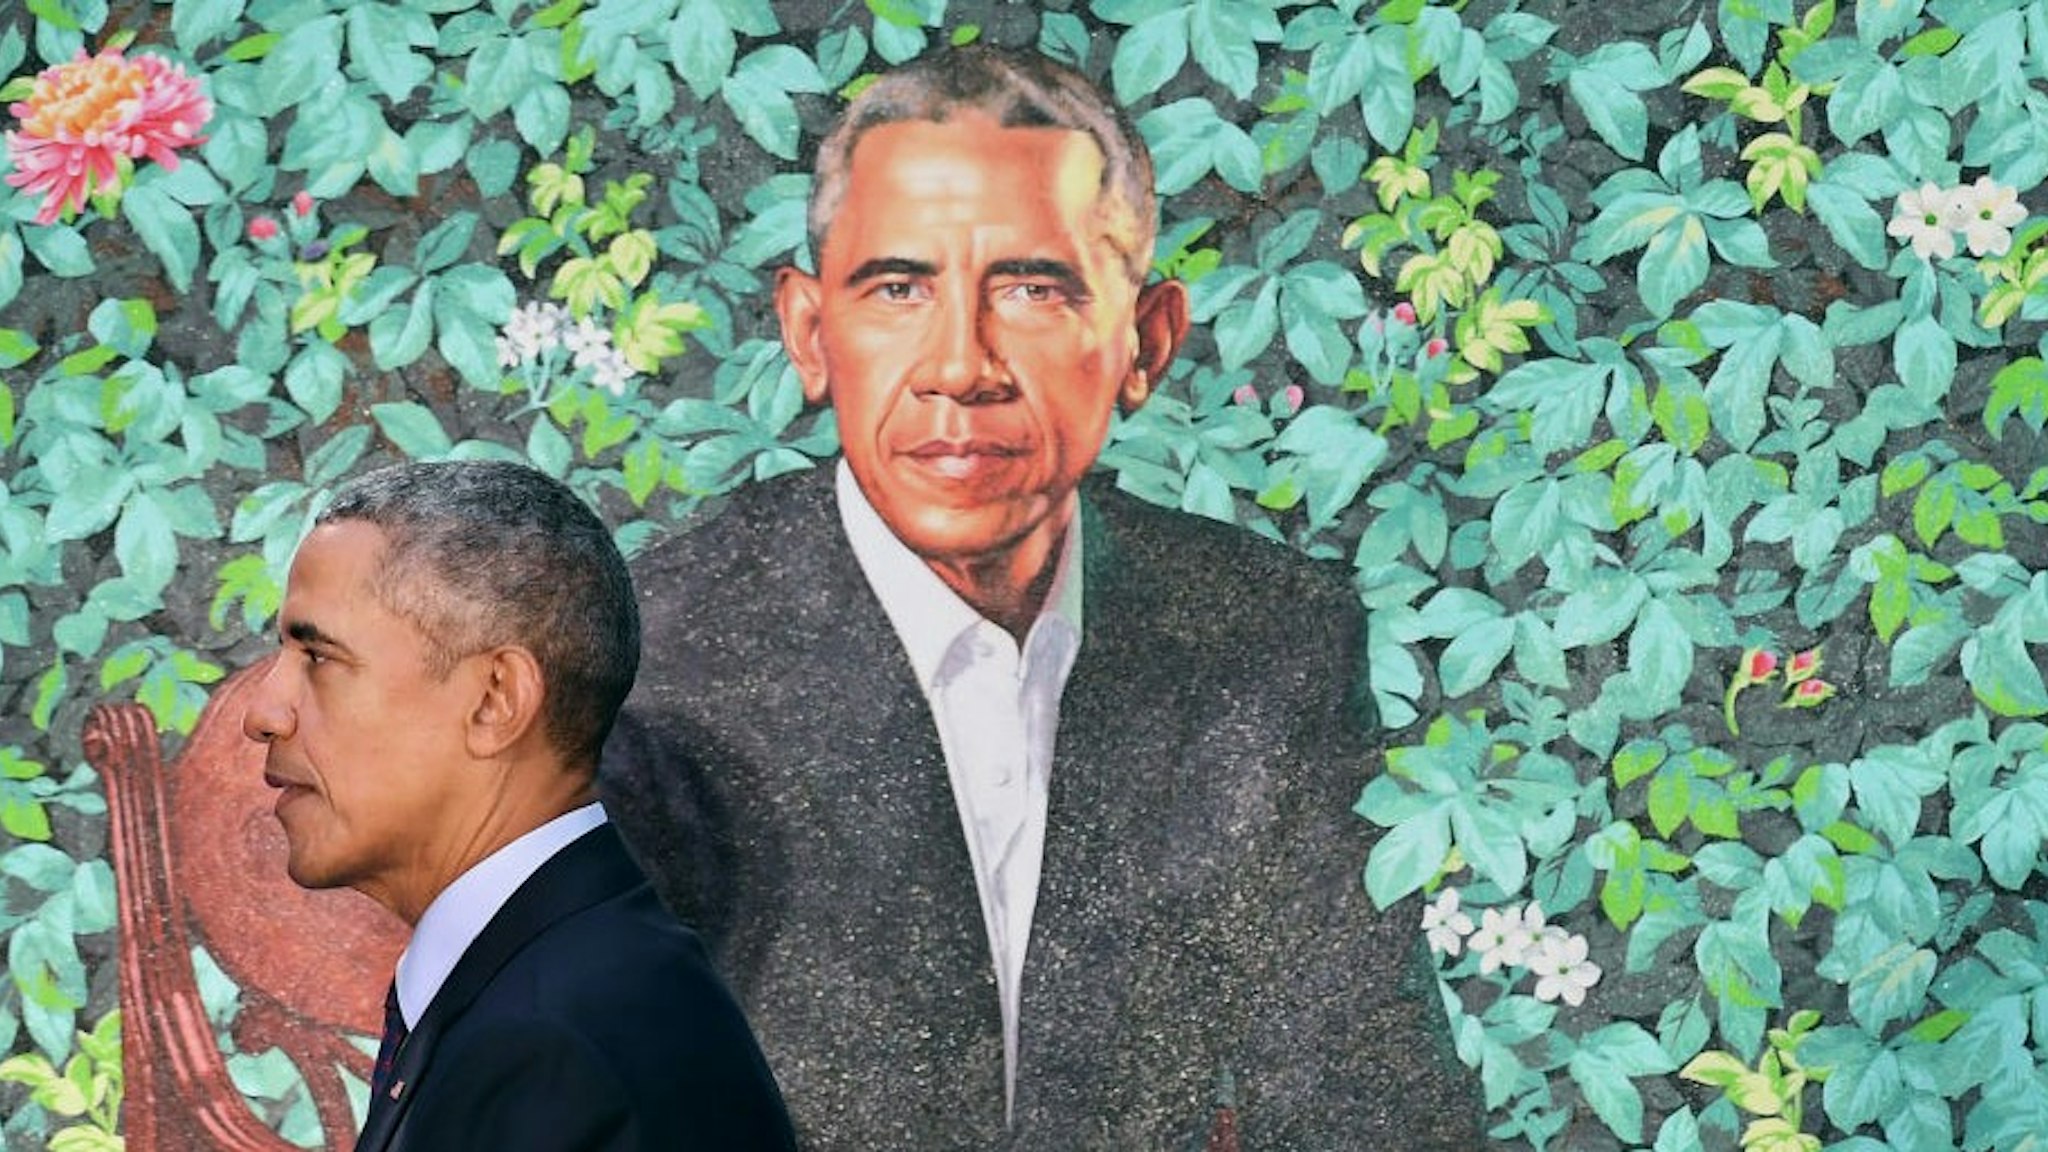 WASHINGTON, DC - FEBRUARY 12: Former President Barack Obama walks by his presidential portrait as he and former First Lady Michelle Obama have their portraits unveiled at the Smithsonian National Portrait Gallery on Monday February 12, 2018 in Washington, DC. The former President's portrait was painted by Kehinde Wiley while the former First Lady's portrait was painted by Amy Sherald. (Photo by Matt McClain/The Washington Post via Getty Images)